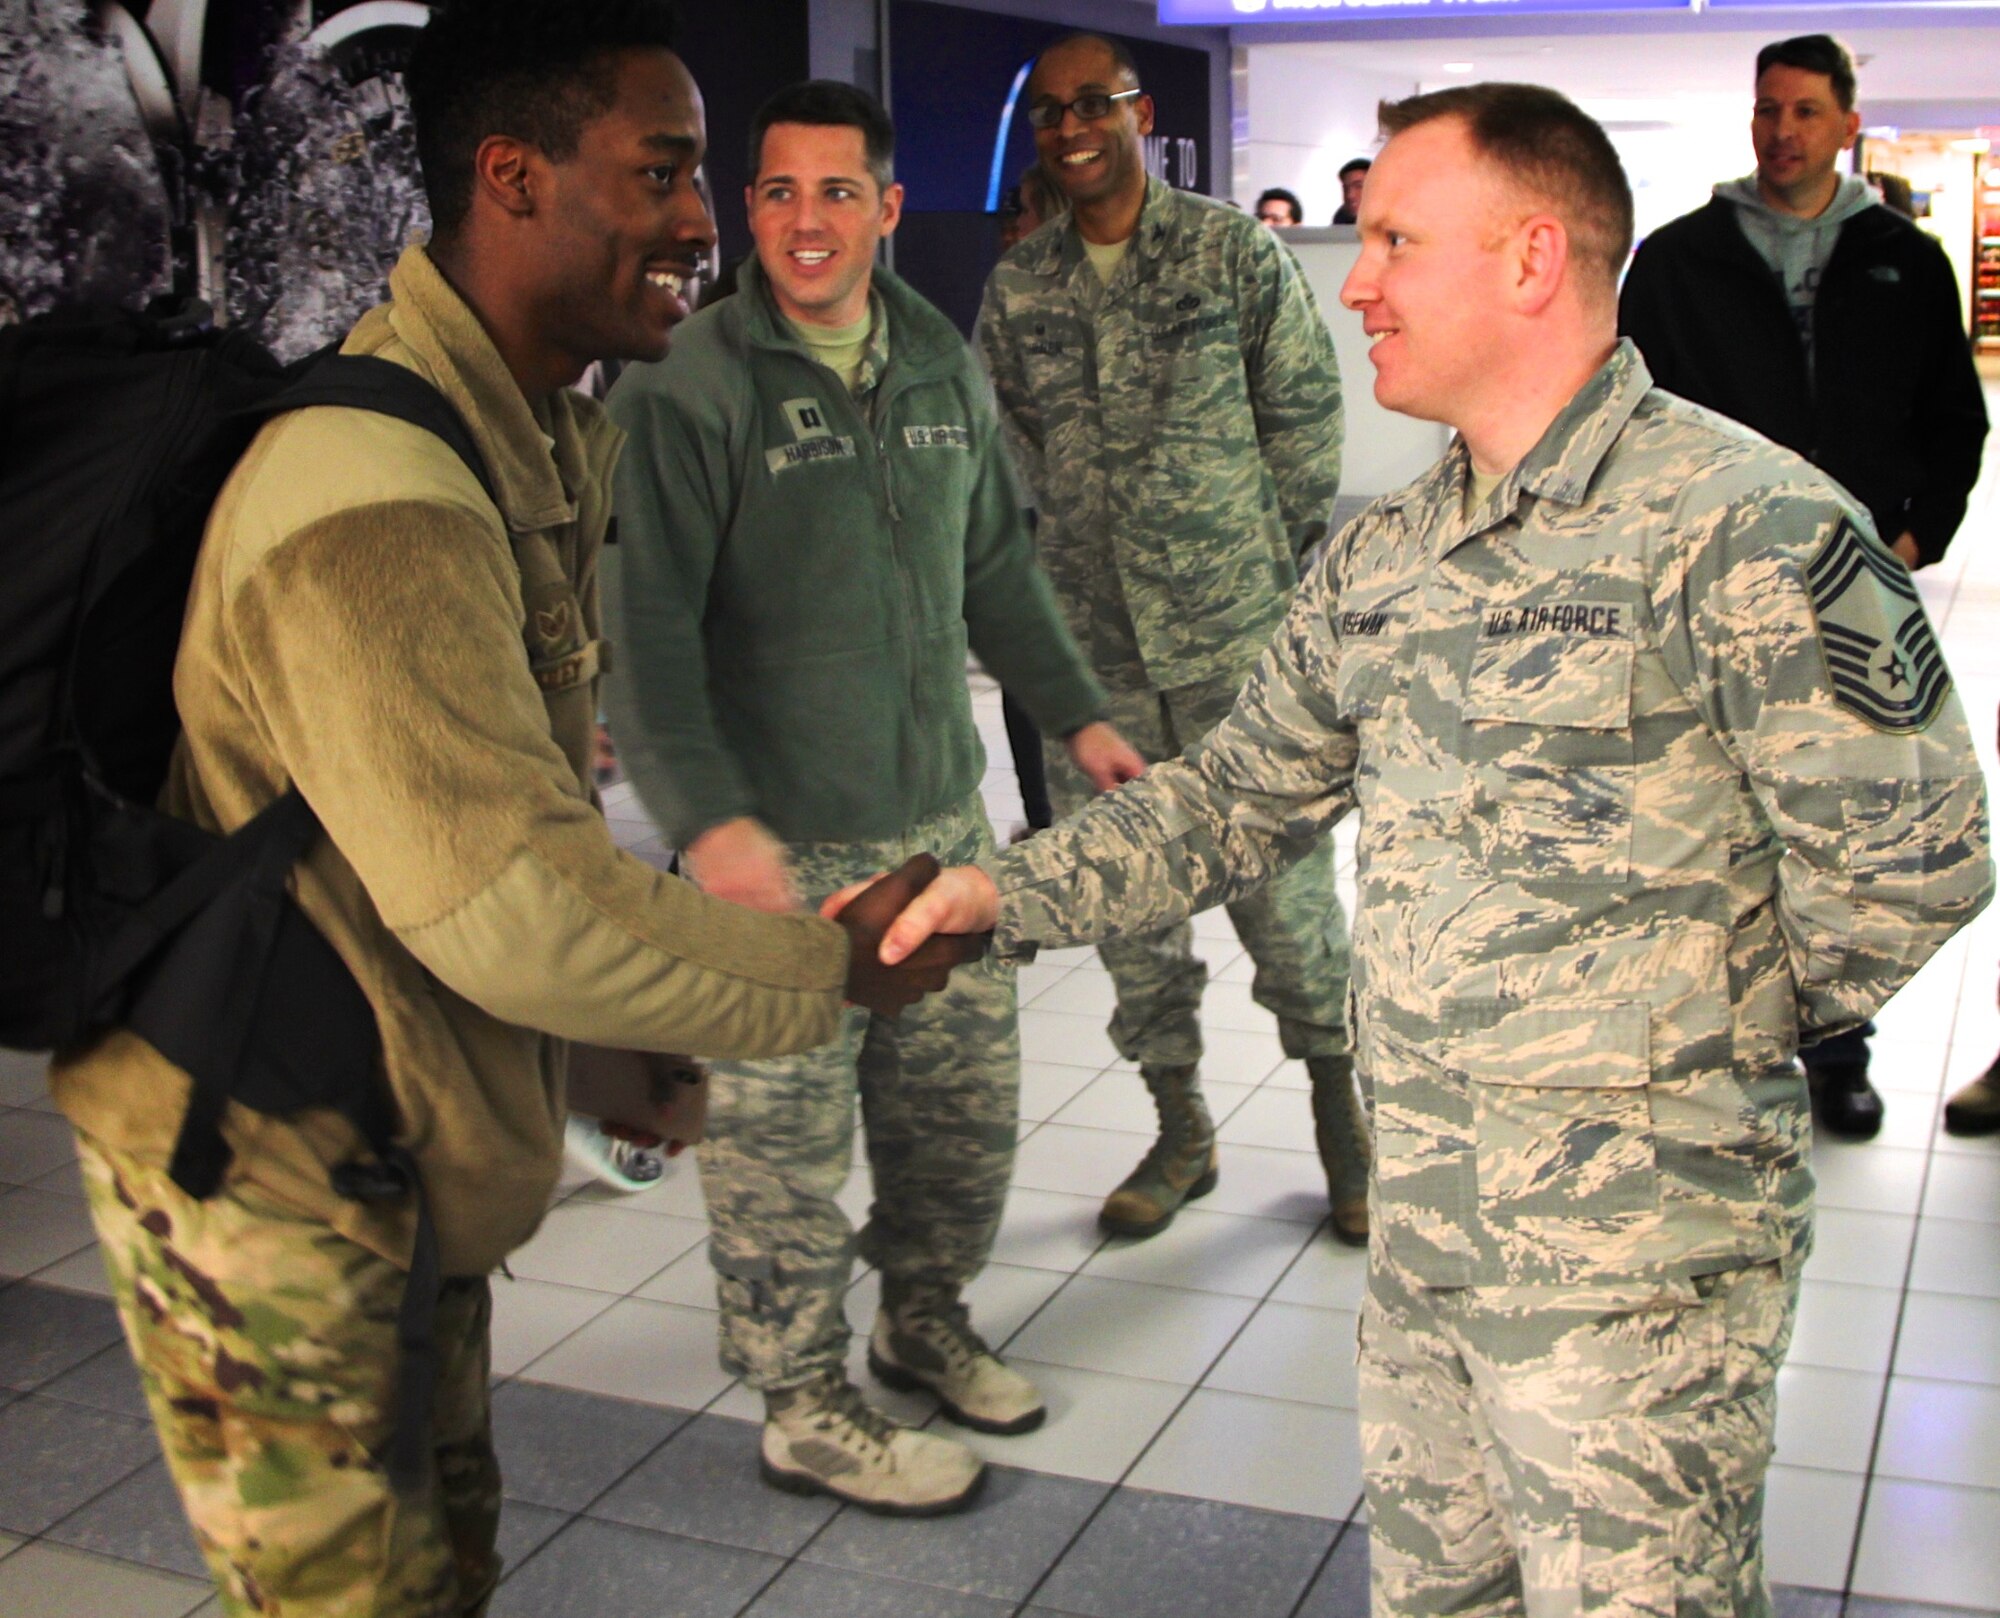 932nd Airlift Wing members welcomed back several Airmen recently, including deployer Staff Sgt. Excel Bailey.  Shaking his hand upon arrival back in Illinois on January 14, 2019, is Chief Master Sgt. Darren Wiseman of the unit's 932nd Inspector General Inspections office.  The 932nd AW is an Air Force Reserve Command unit located at Scott Air Force Base, Illinois.
(U.S. Air Force photo by Lt. Col Stan Paregien)